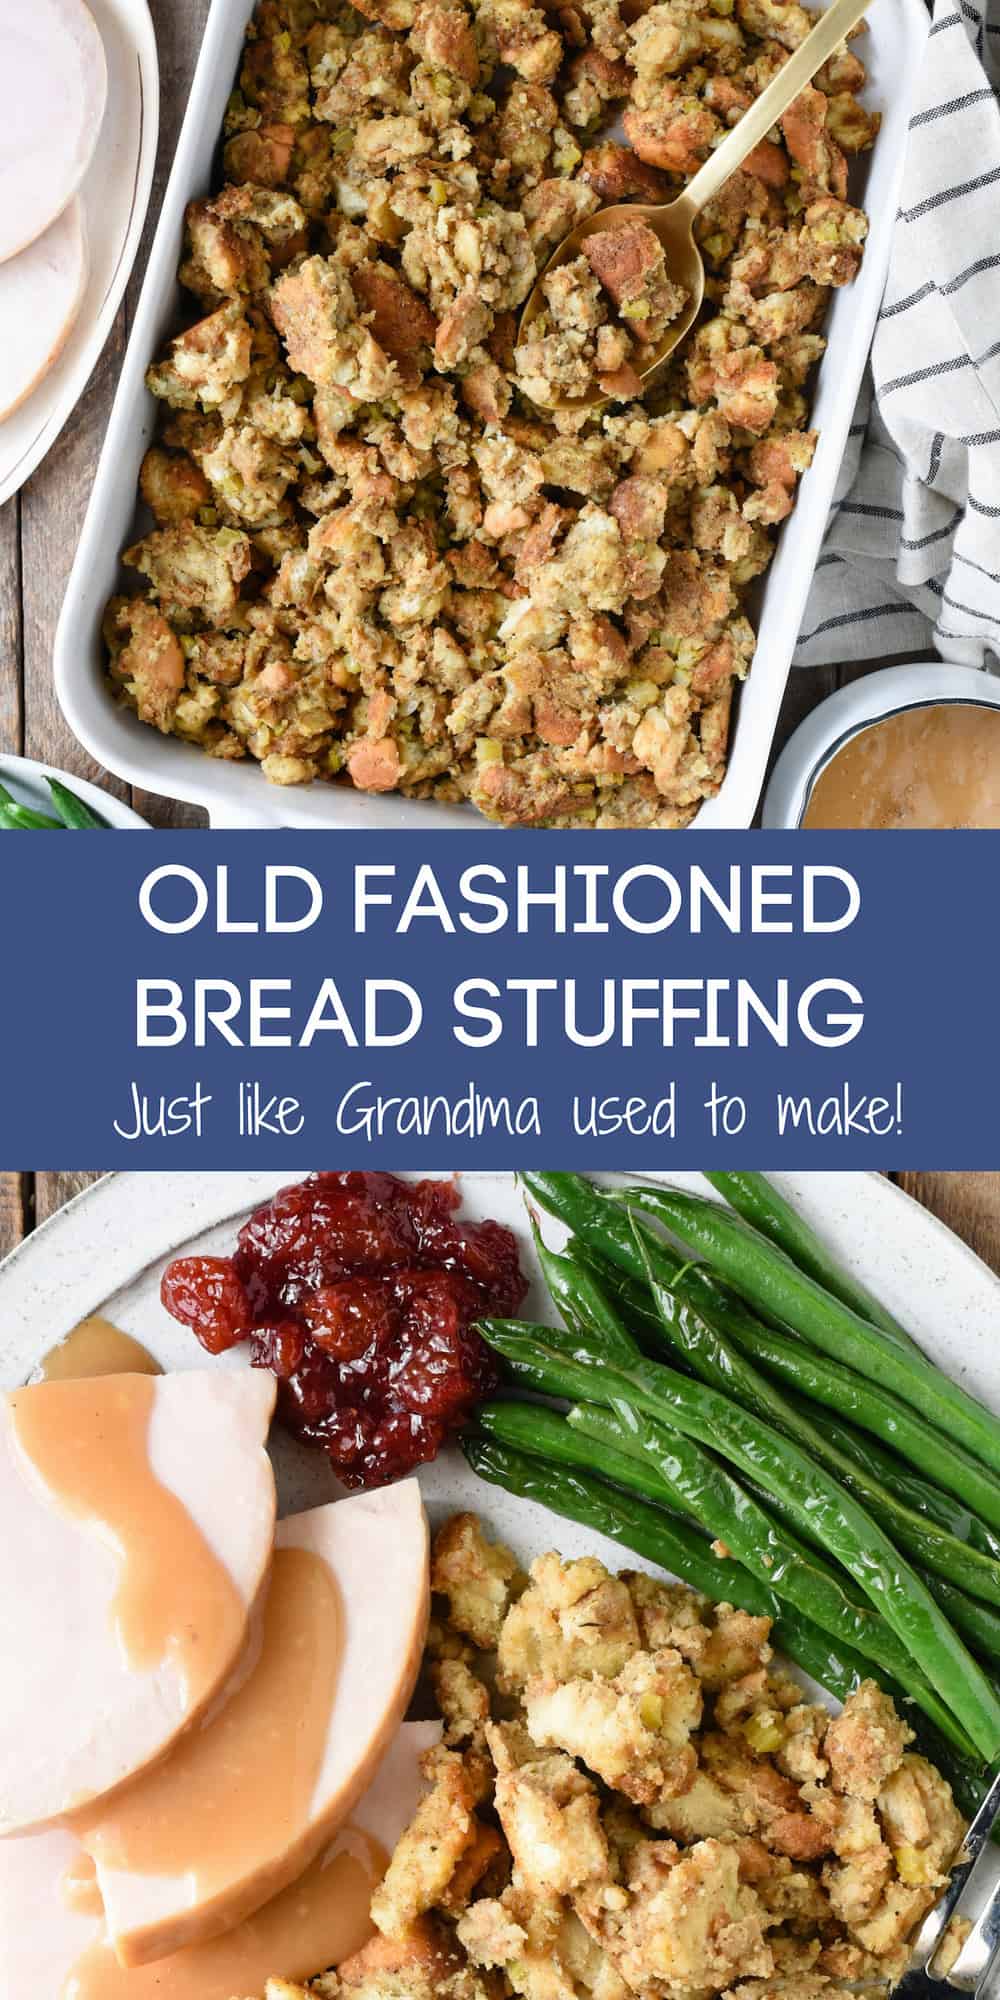 Collage of images of baking dish filled with bread stuffing, and plate of Thanksgiving food, with overlay: OLD FASHIONED BREAD STUFFING Just like Grandma used to make!